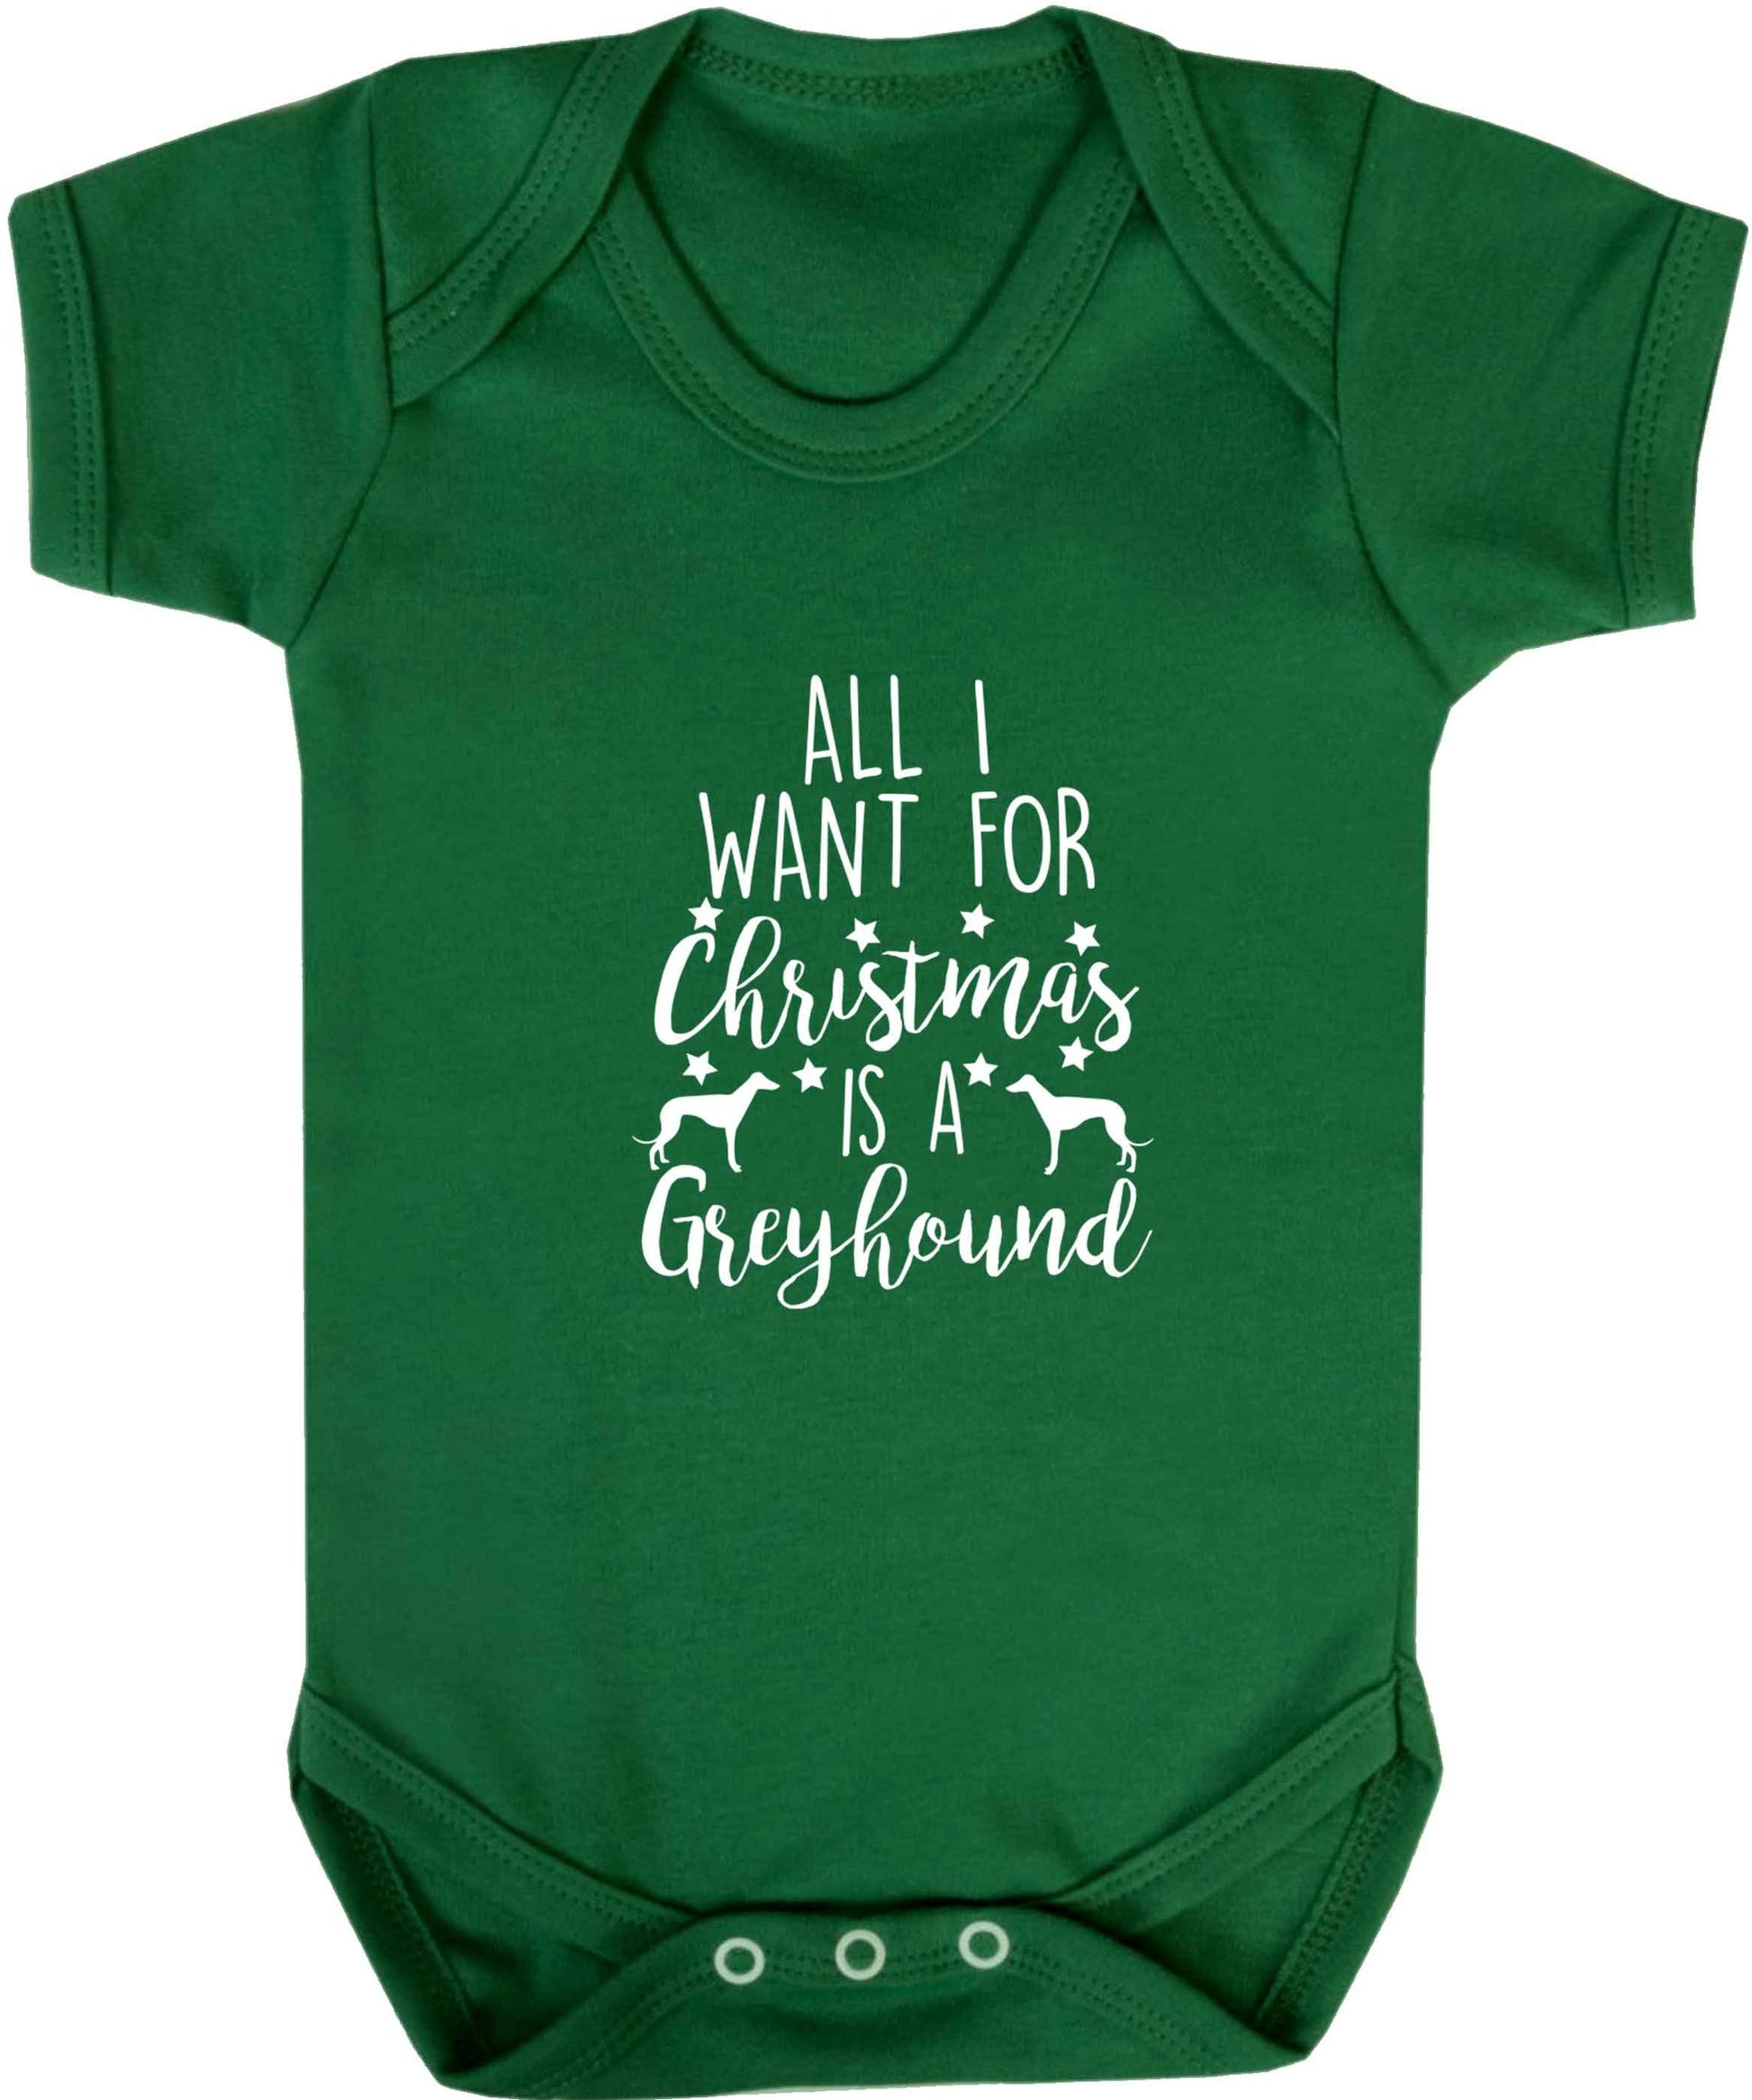 All I want for Christmas is a greyhound baby vest green 18-24 months